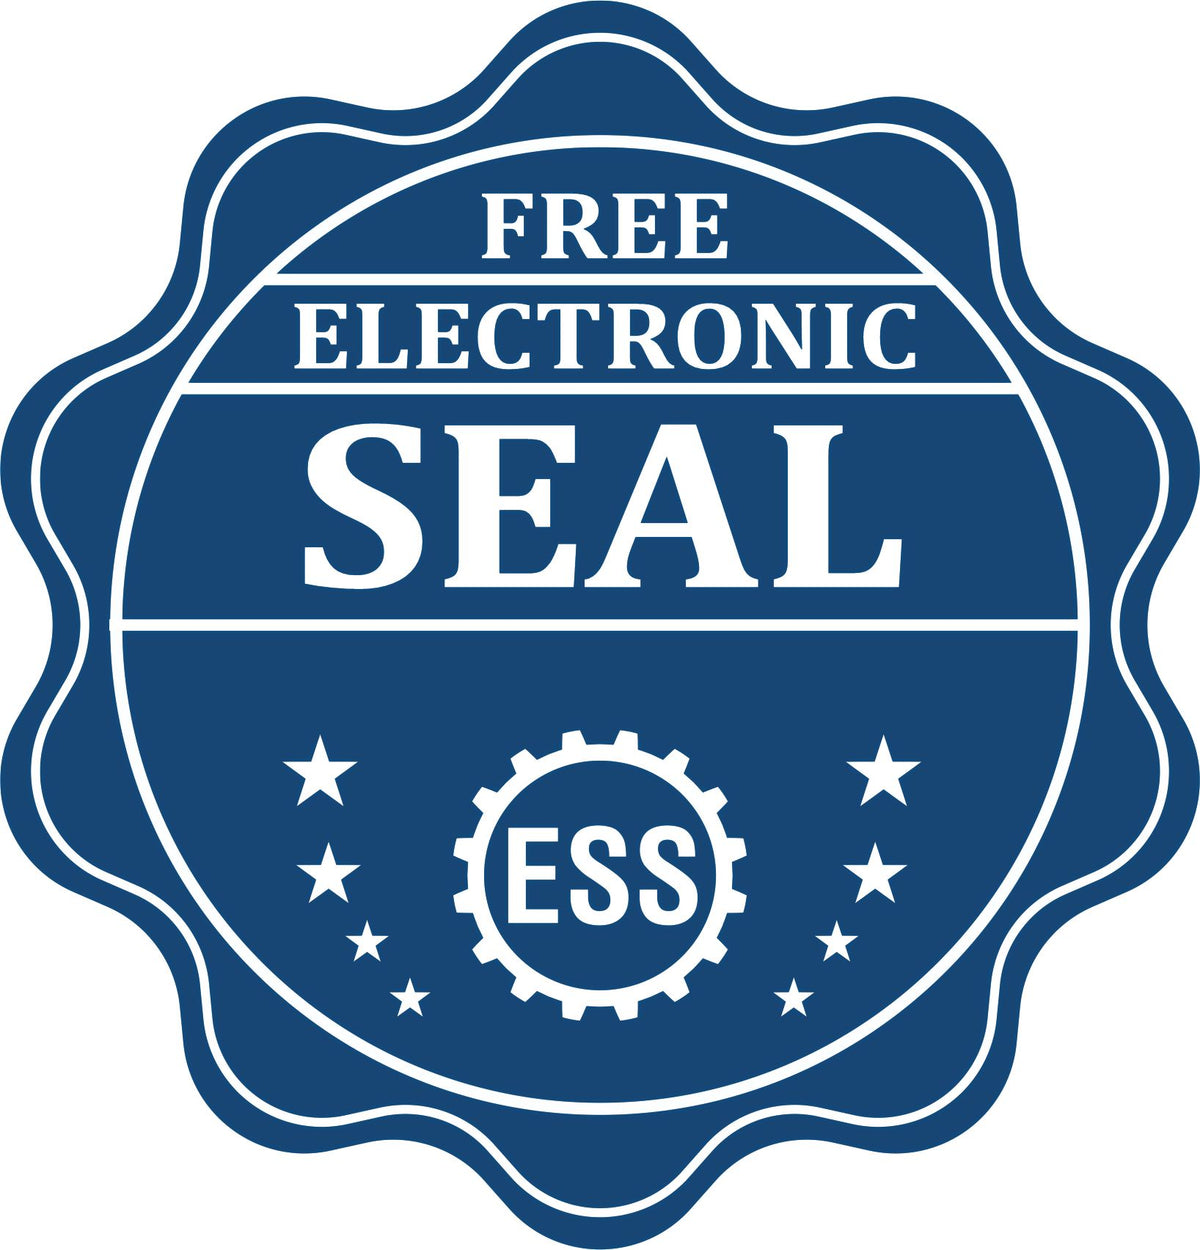 A badge showing a free electronic seal for the State of Minnesota Extended Long Reach Engineer Seal with stars and the ESS gear on the emblem.